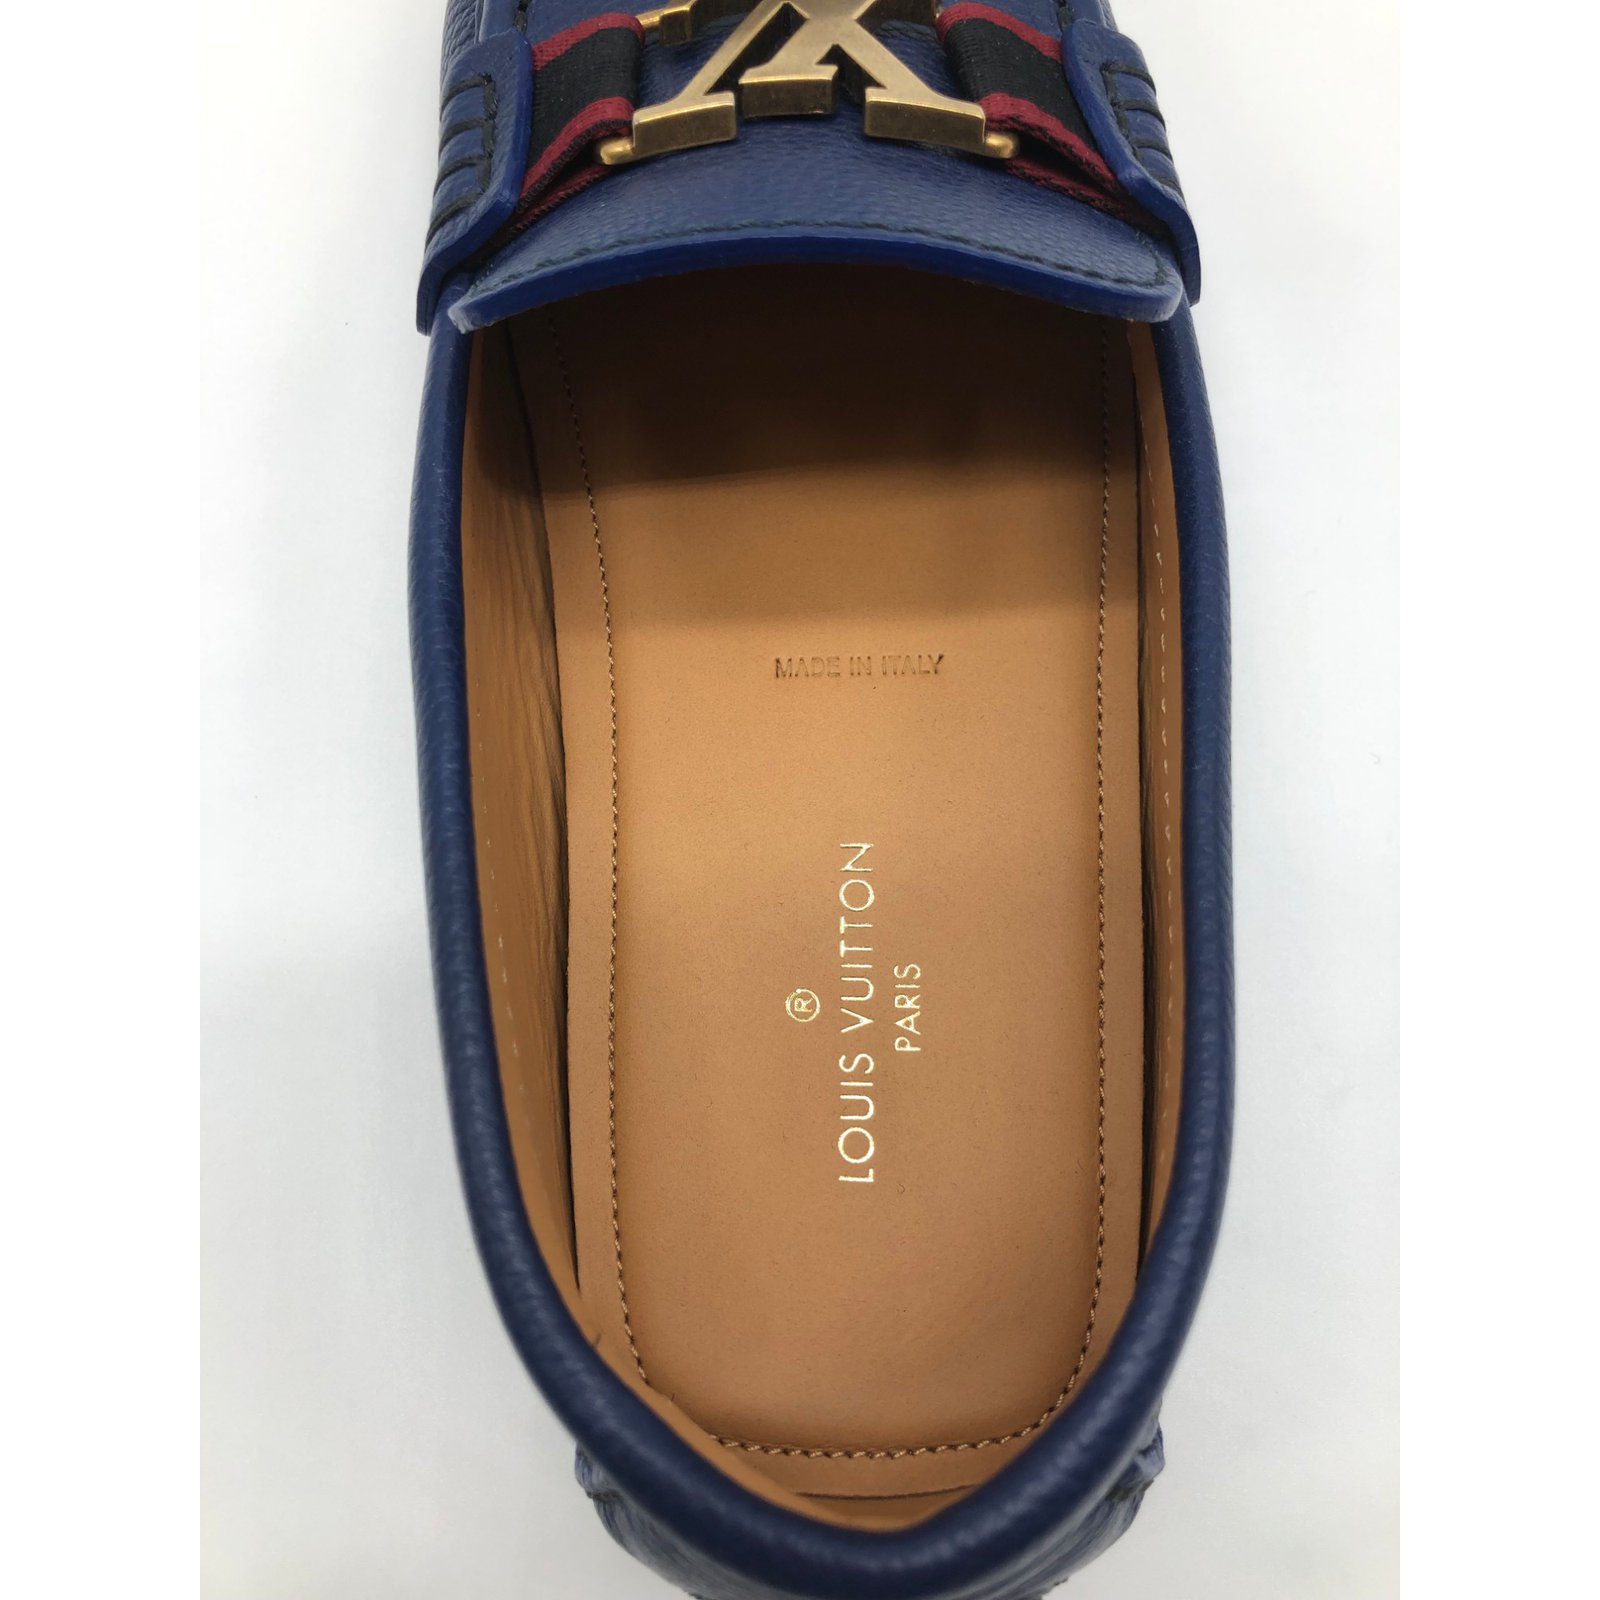 Louis Vuitton moccasins Monte Carlo model in navy grained leather, size 42,  new condition! Navy blue ref.90143 - Joli Closet